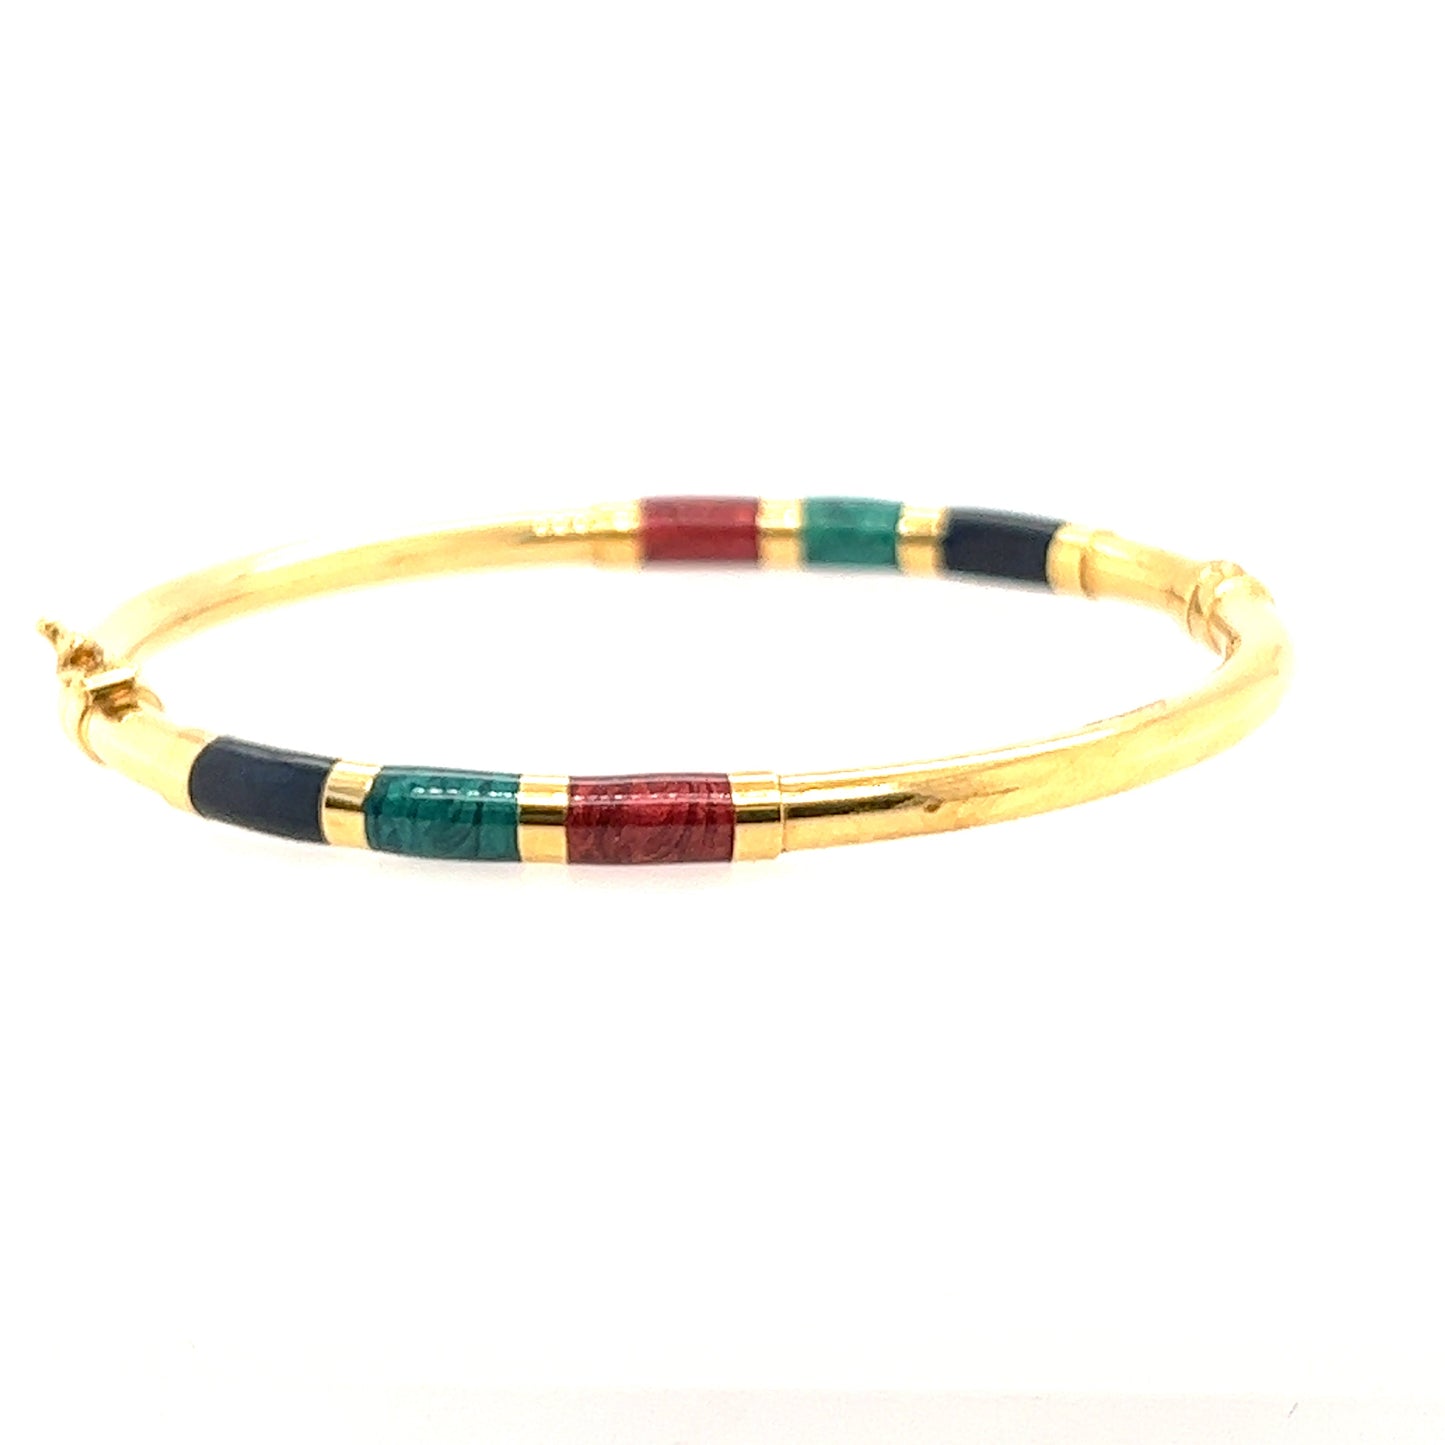 14K Yellow Gold Bangle Bracelet designed with enamel. Very nice pice you can wear everyday.